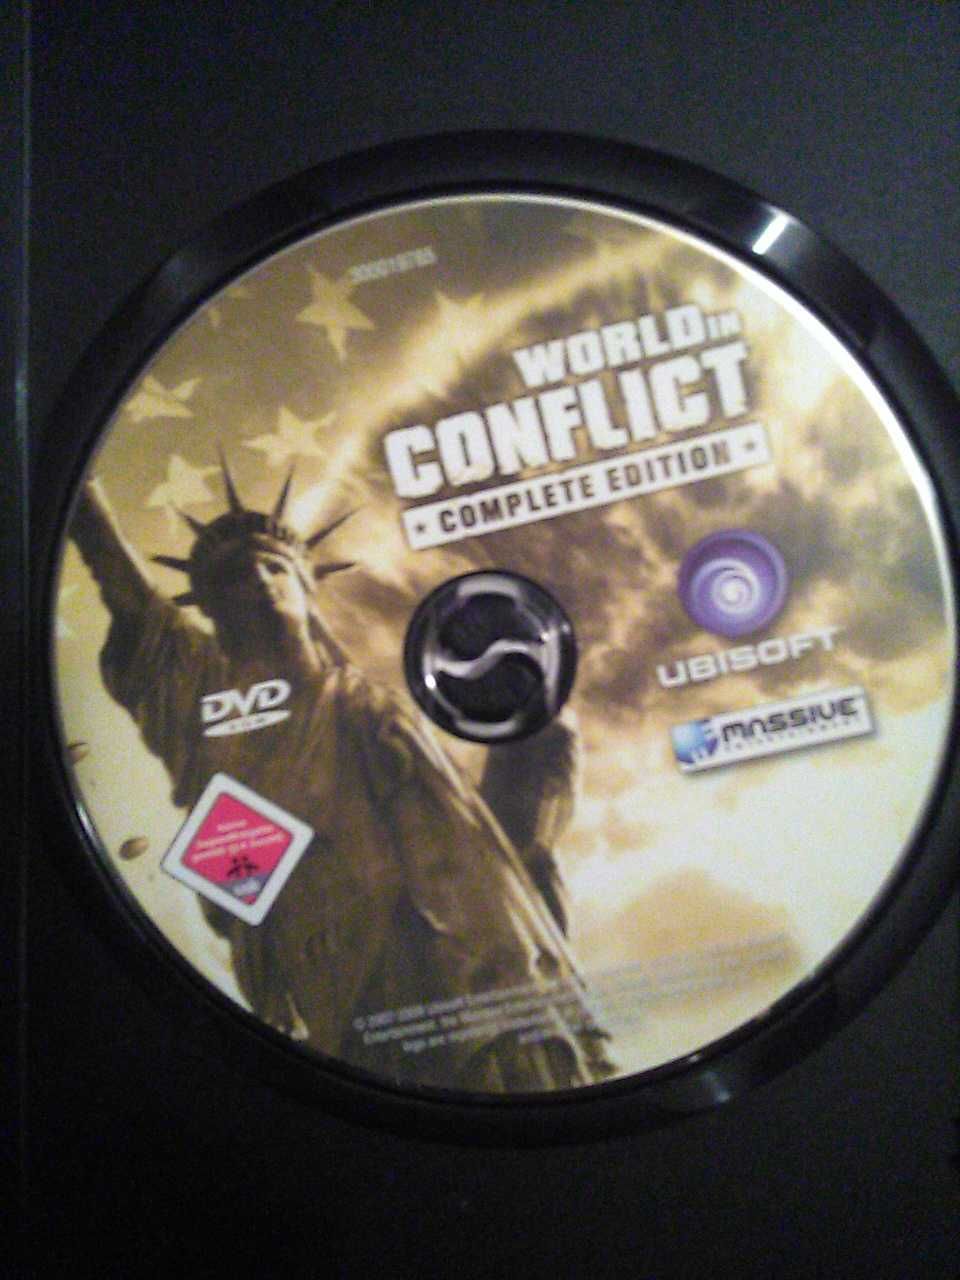 World in Conflict Complete Edition for PC